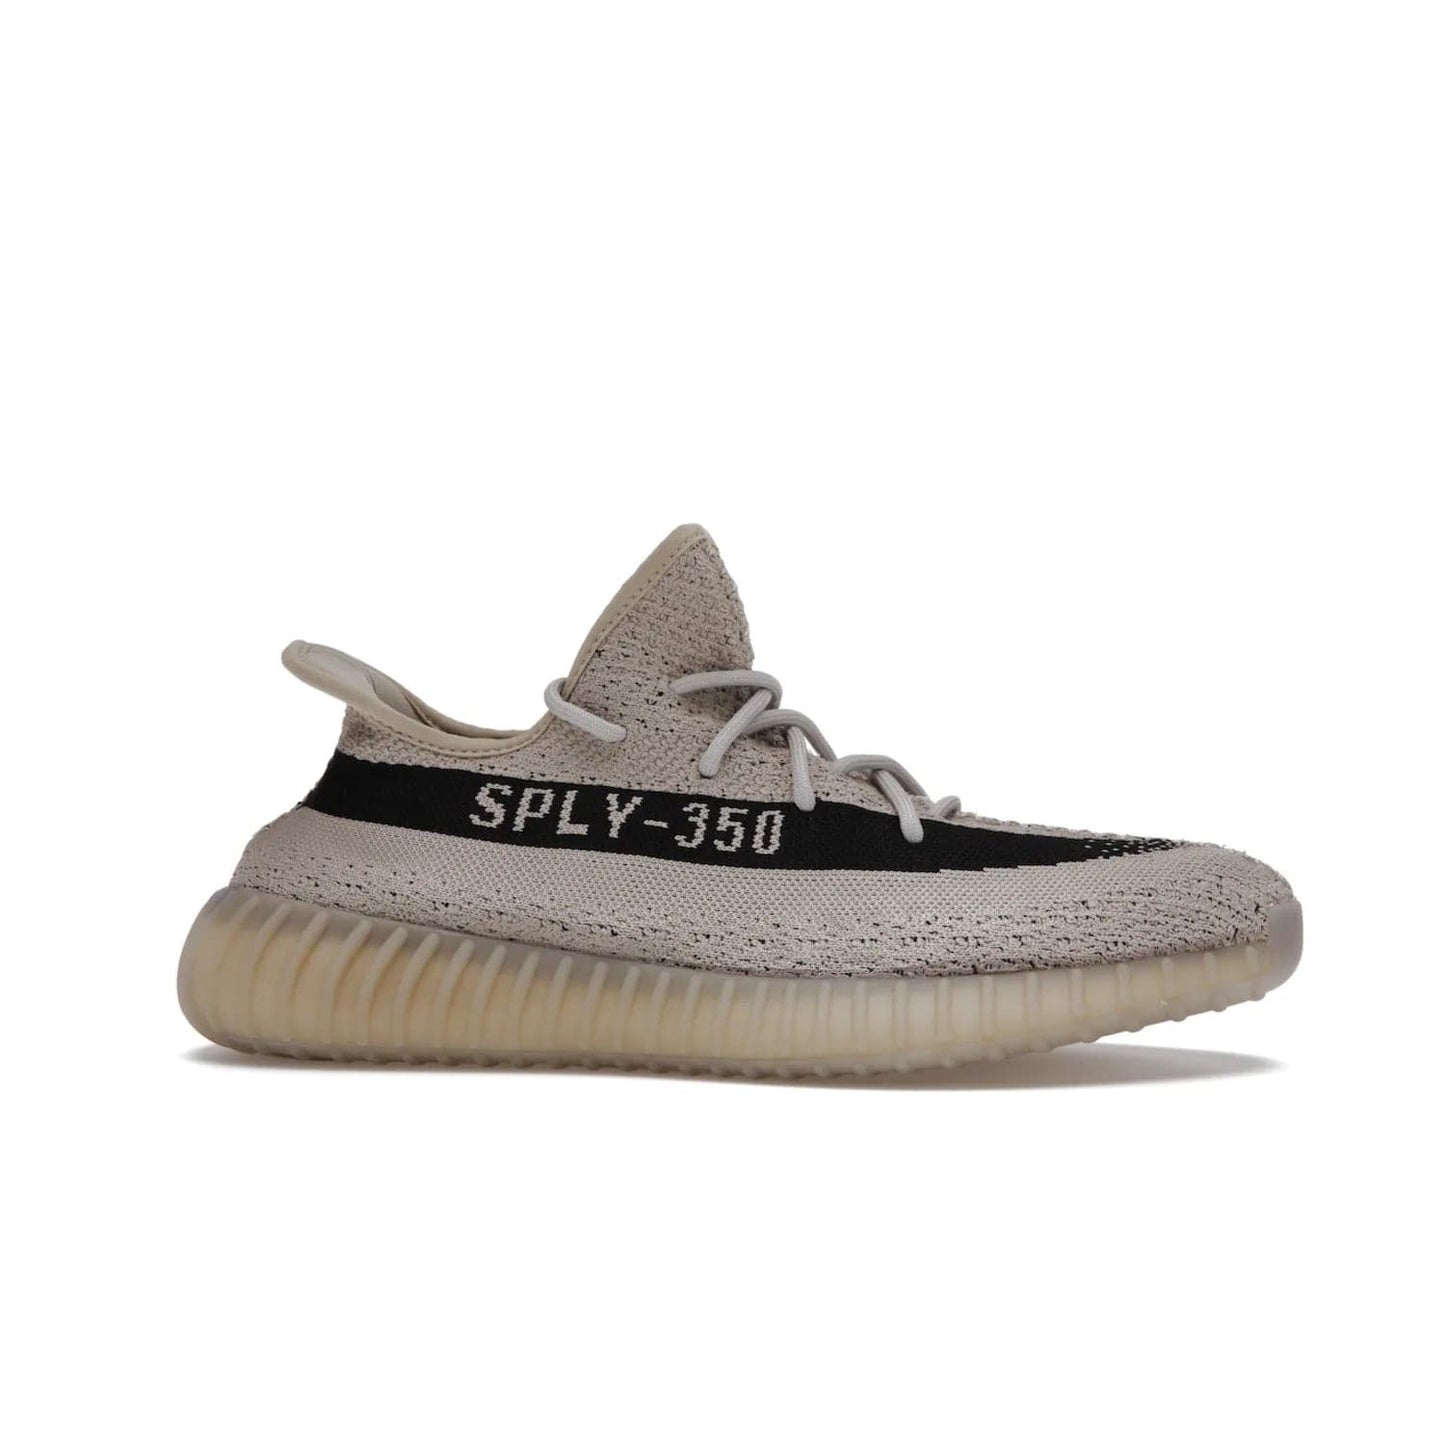 adidas Yeezy Boost 350 V2 Slate - Image 2 - Only at www.BallersClubKickz.com - Adidas Yeezy Boost 350 V2 Slate Core Black Slate featuring Primeknit upper, Boost midsole and semi-translucent TPU cage. Launched on 3/9/2022, retailed at $230.